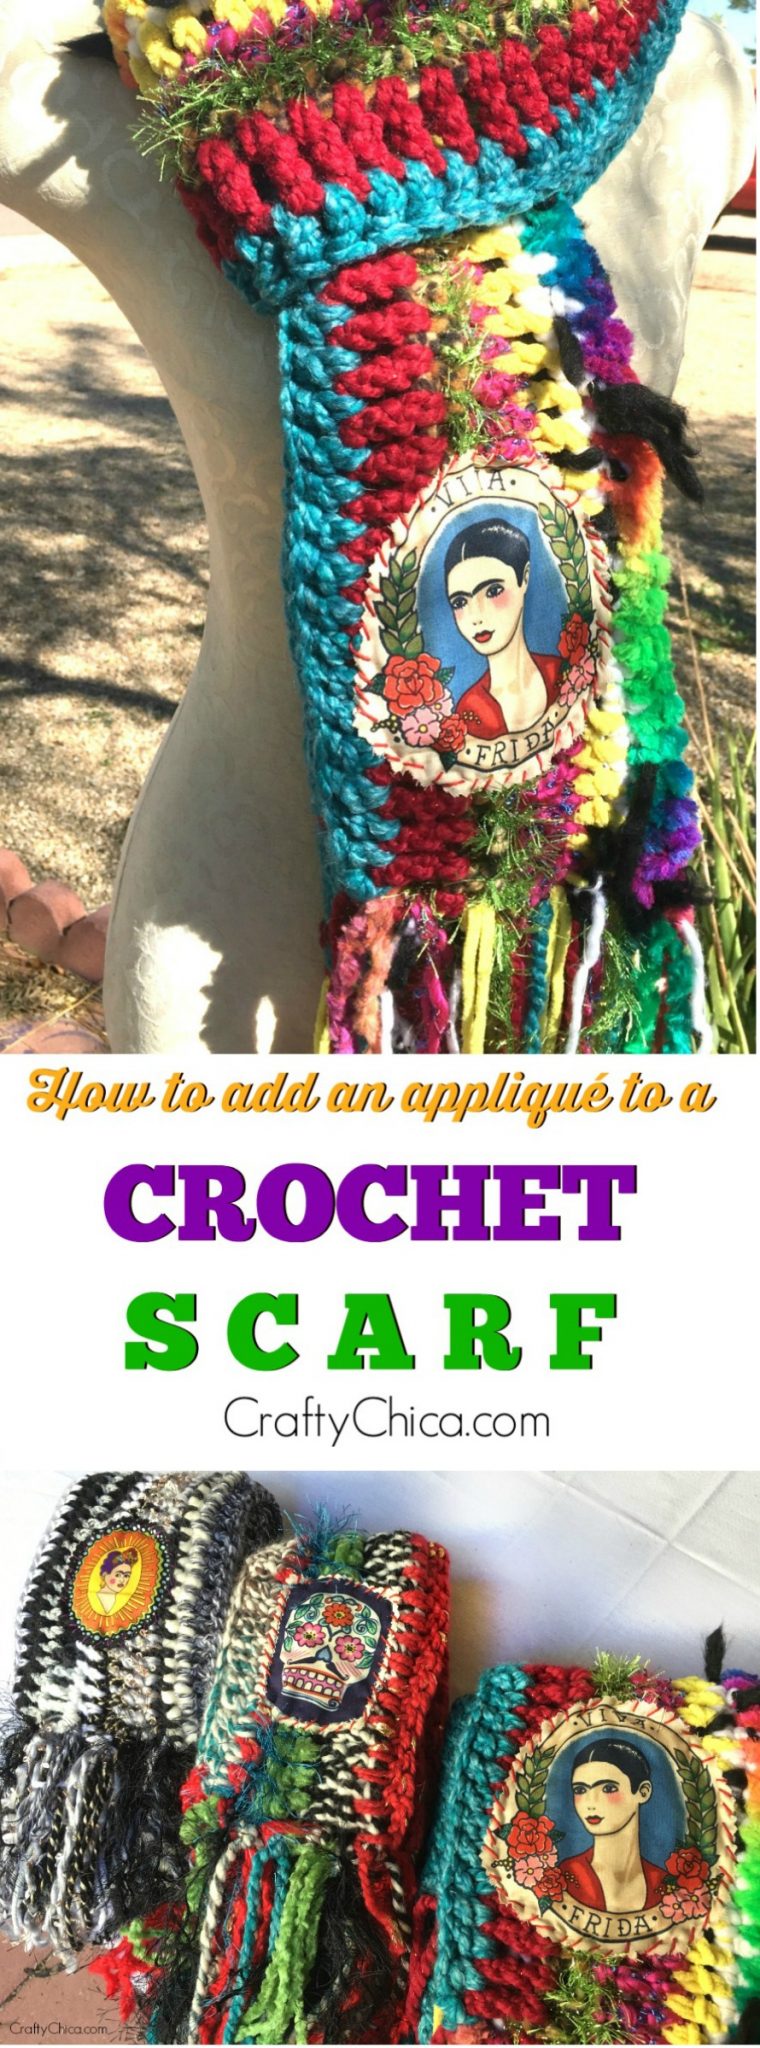 How to add an applqiue to your crochet, CraftyChica.com